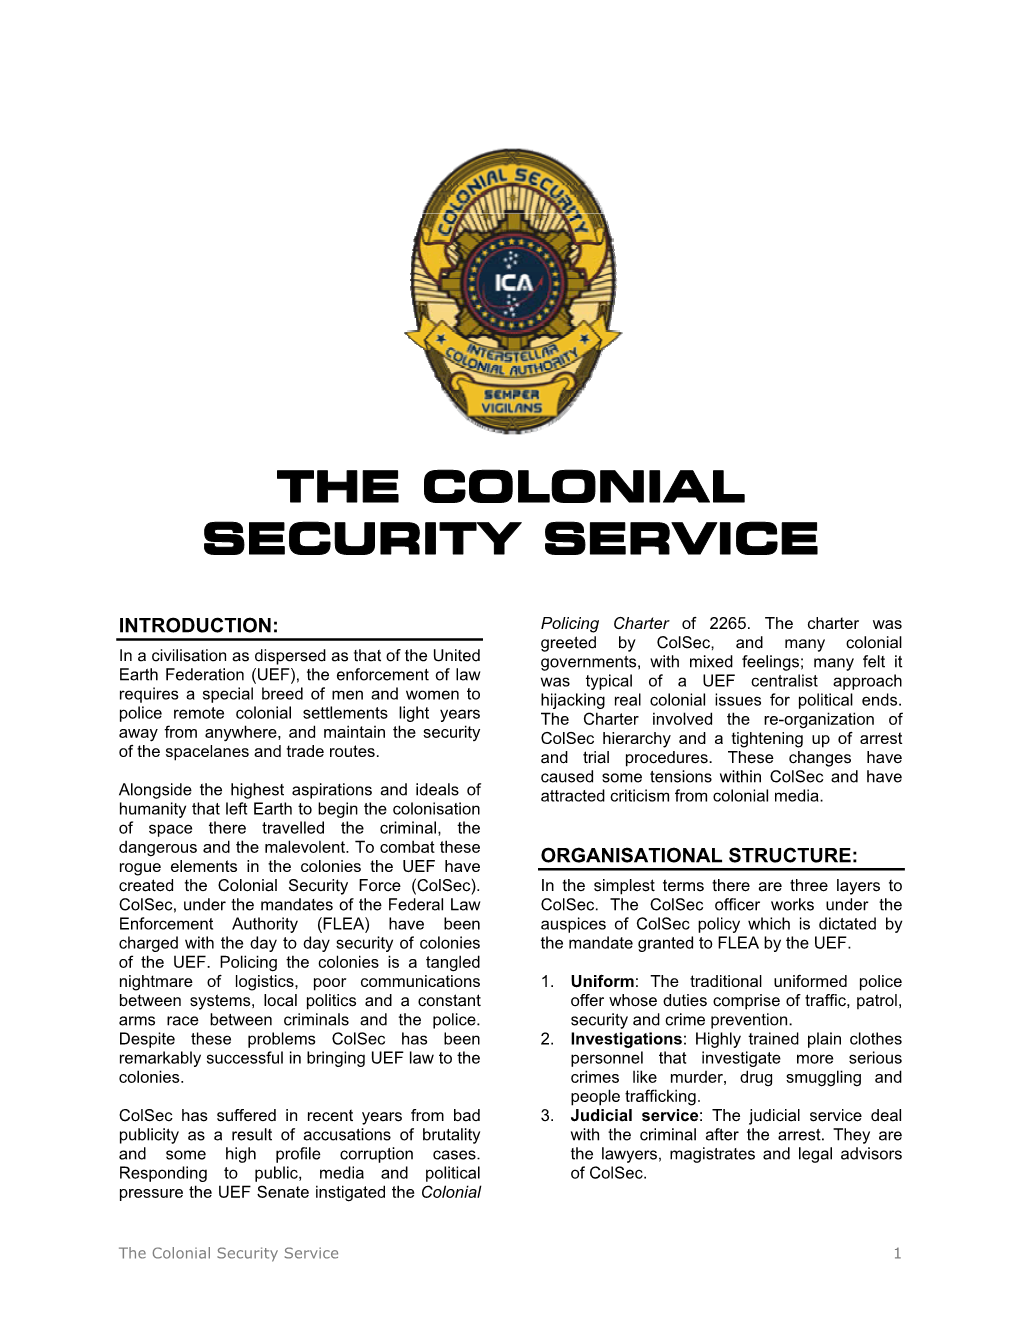 The Colonial Security Service